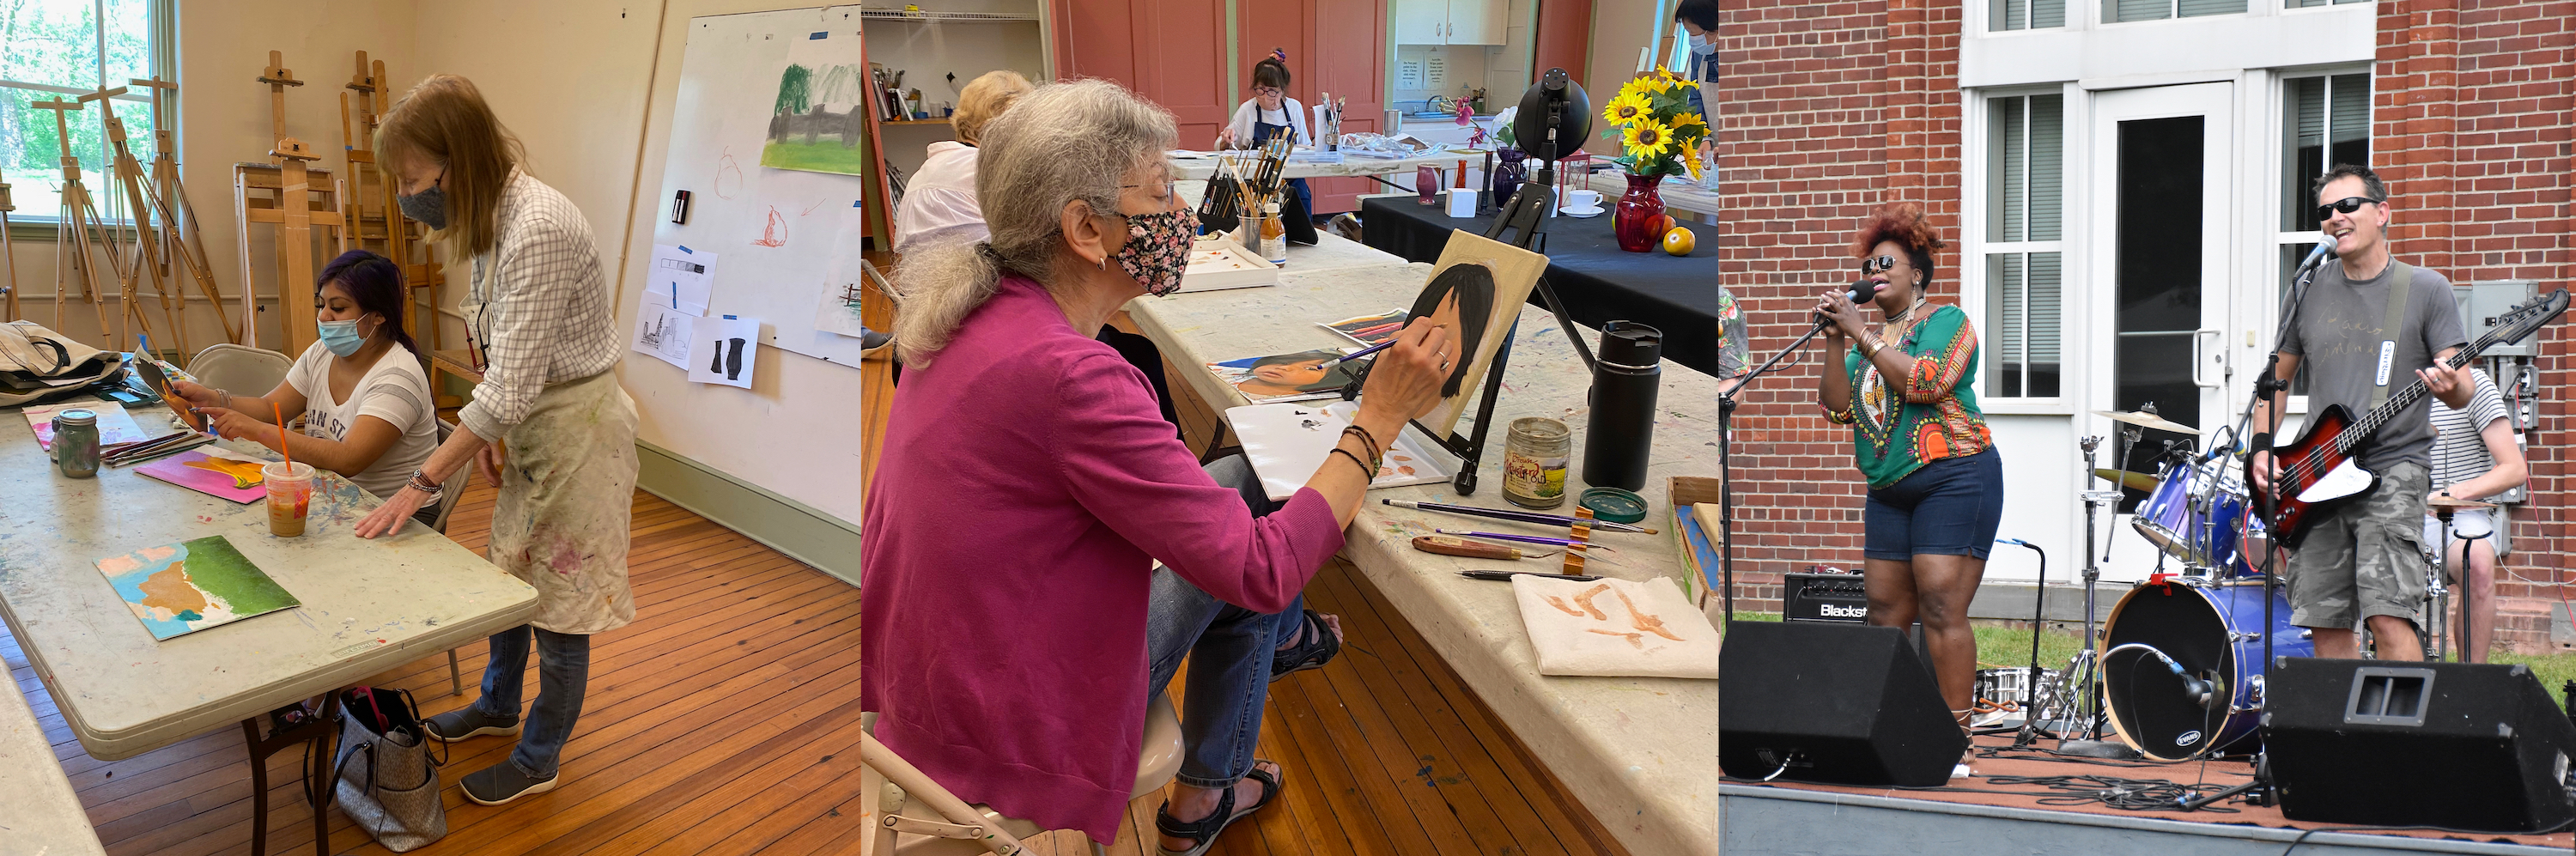 Images or CCArts art classes in session and live band